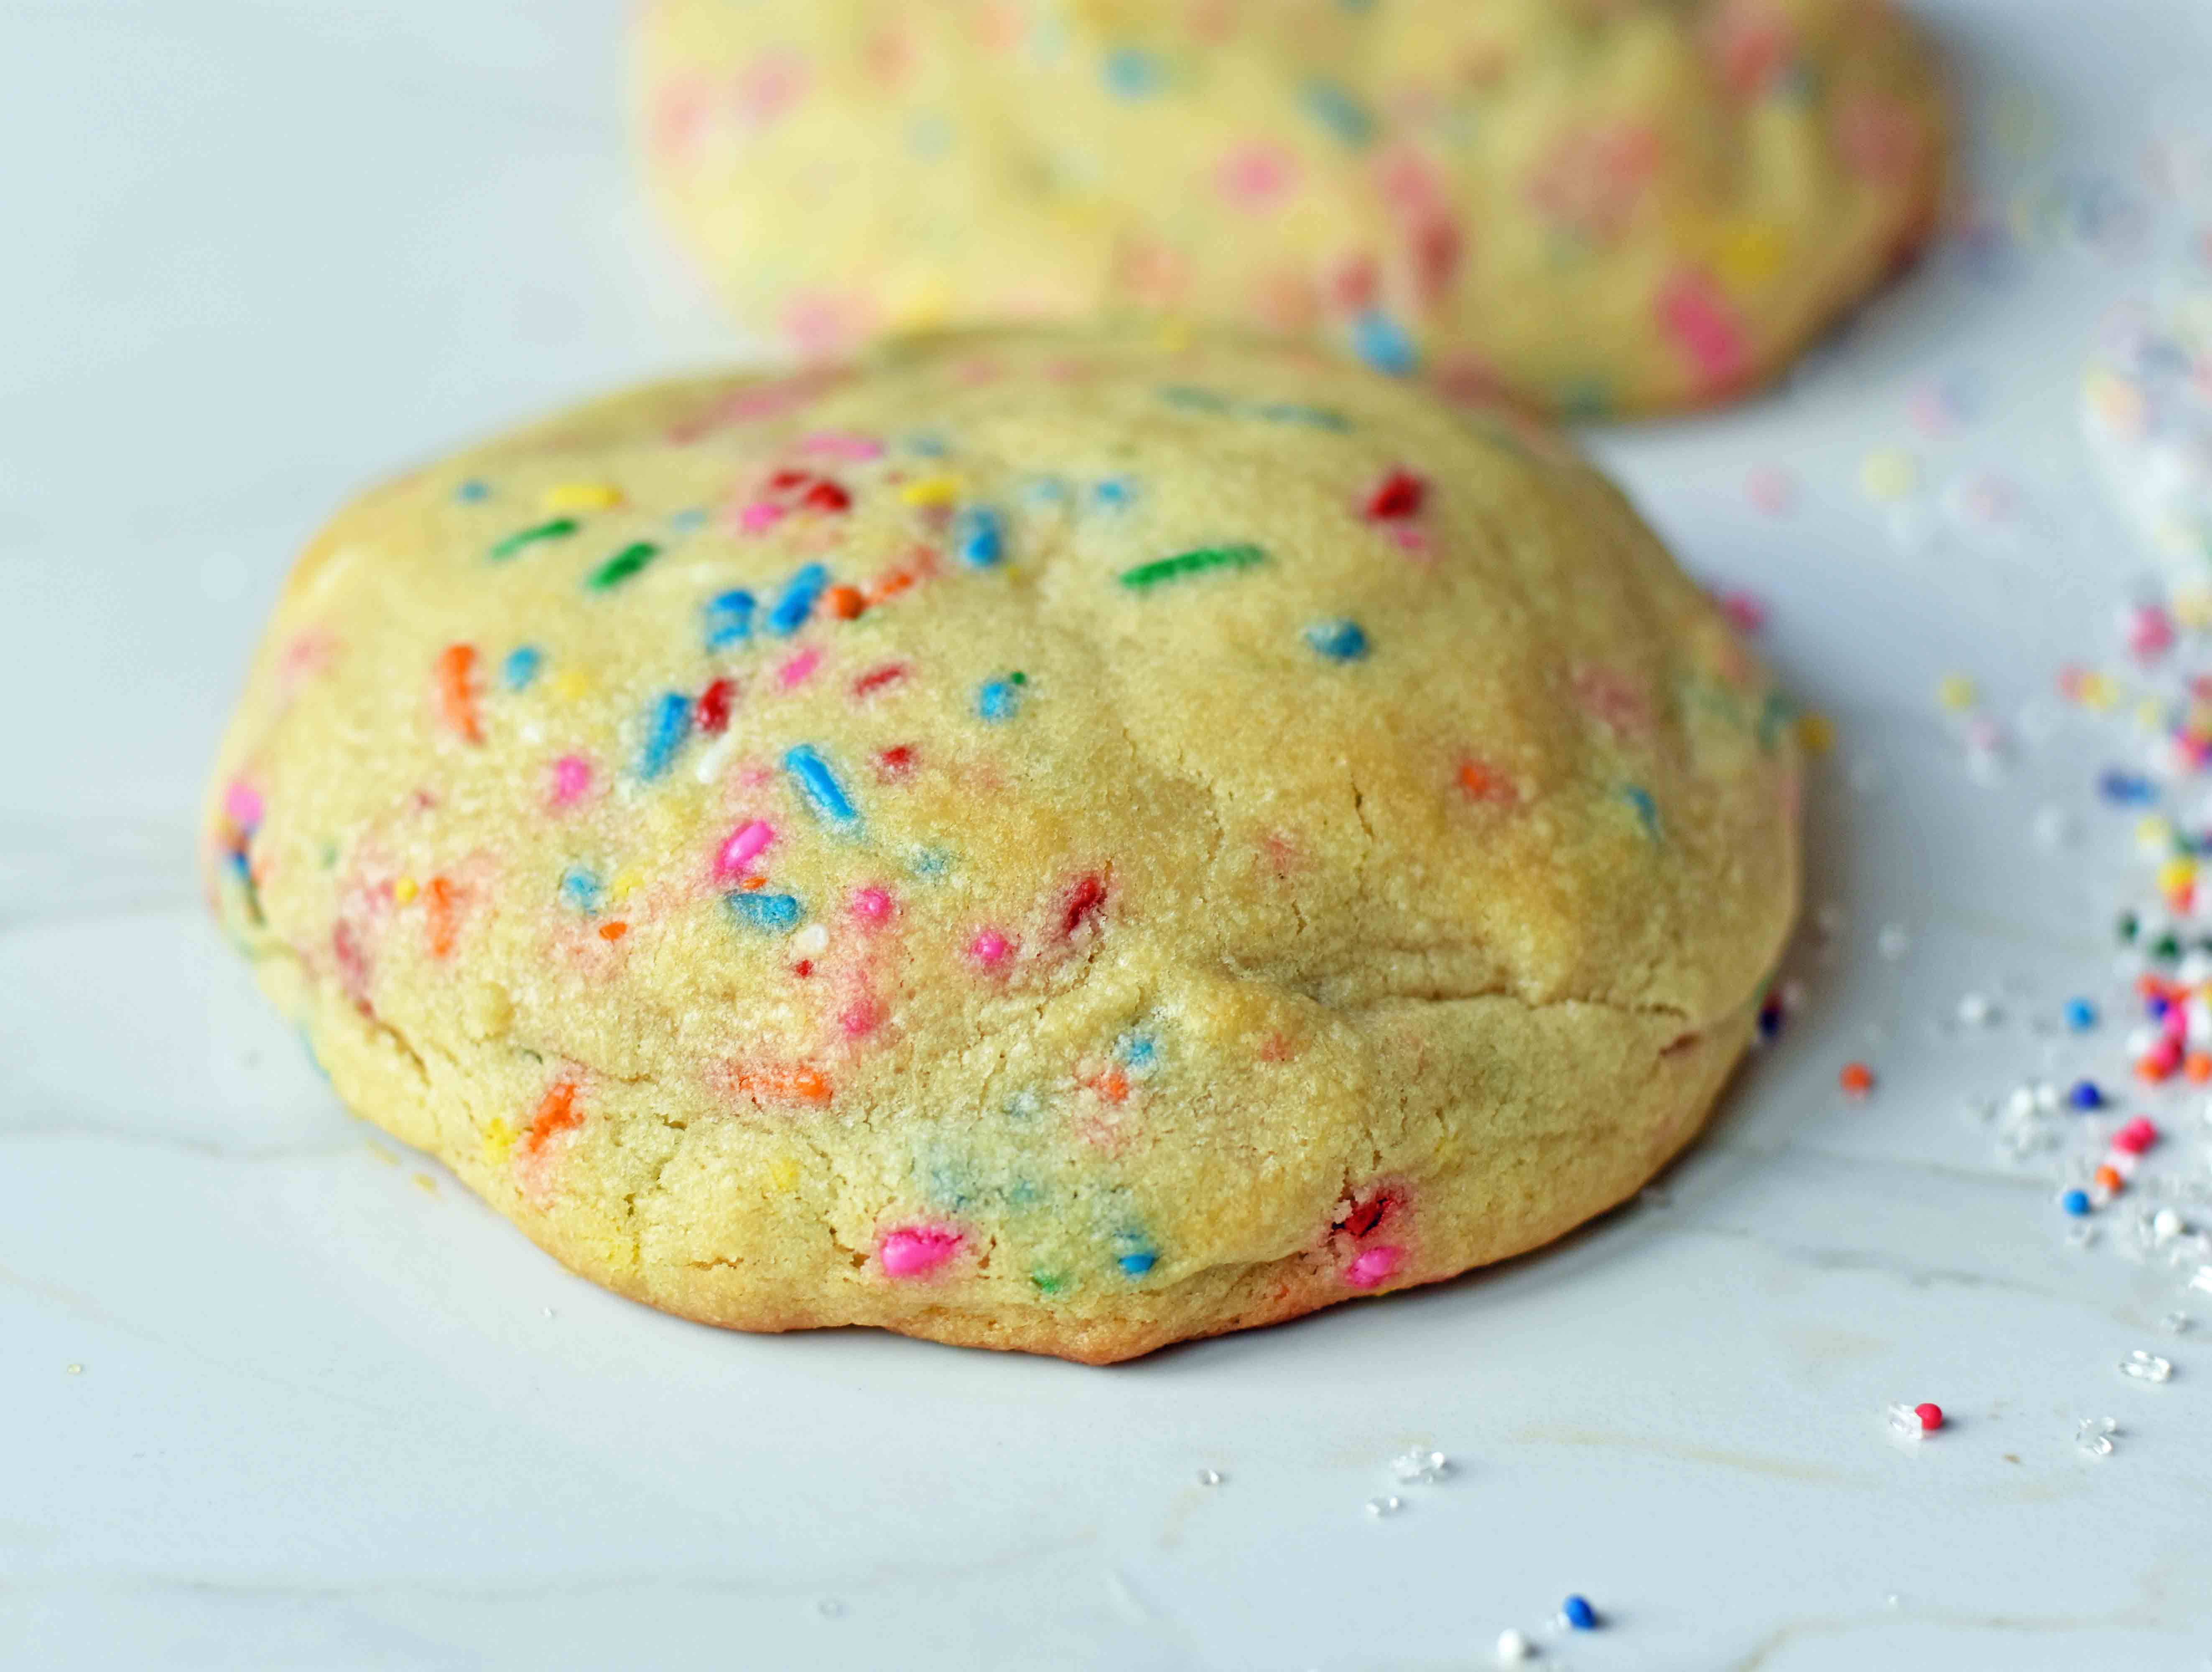 Funfetti Cookies are soft chewy vanilla sugar cookies with rainbow sprinkles. Sprinkles cookies are perfect for birthday parties, graduation, or any celebration. The perfect funfetti cookie made from scratch. www.modernhoney.com